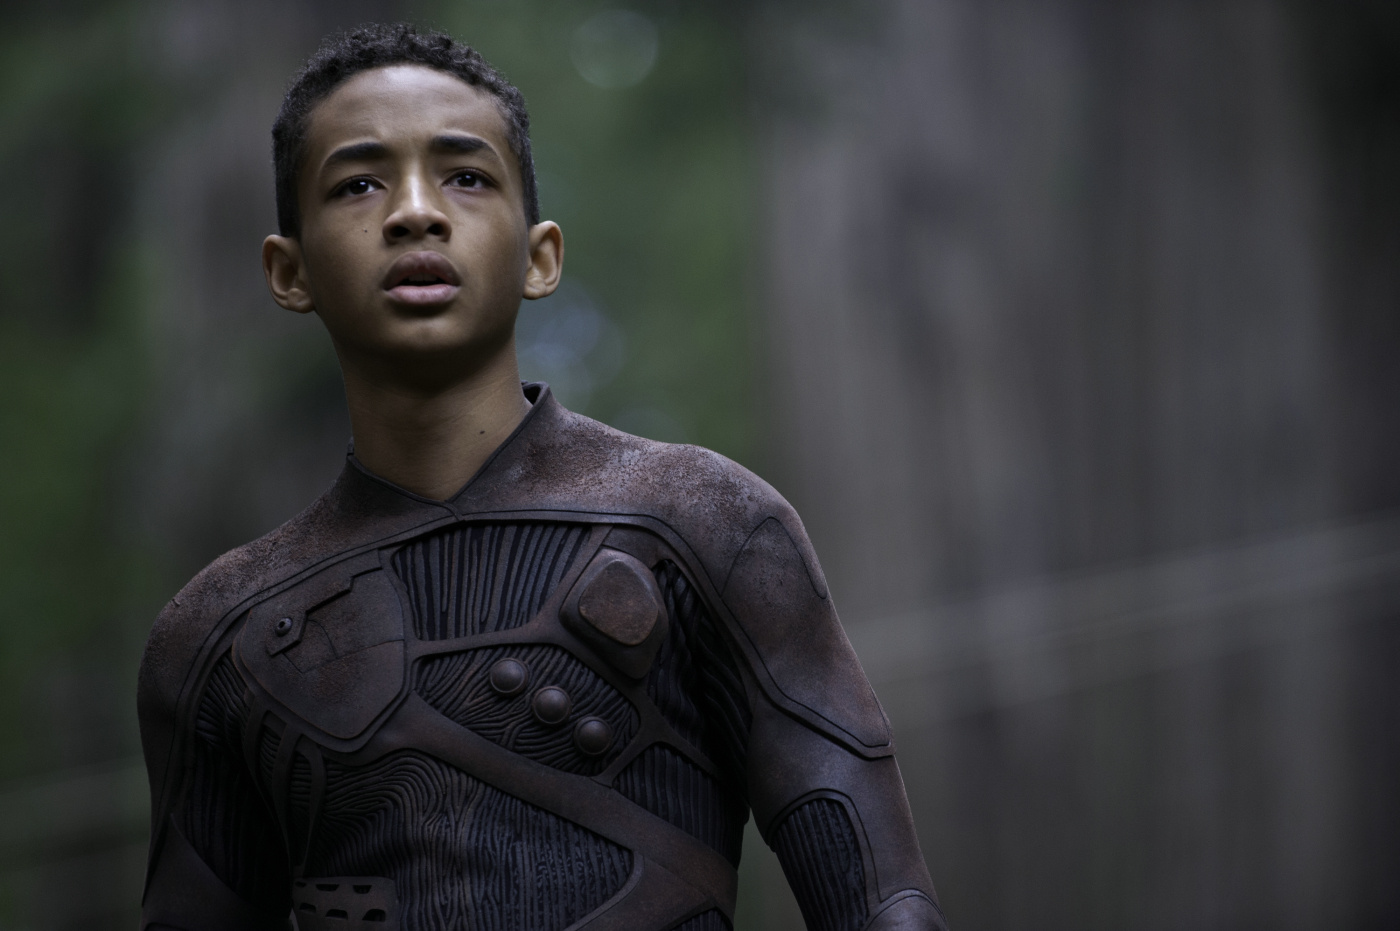 Image Source From This - Jaden Smith Movie After Earth , HD Wallpaper & Backgrounds